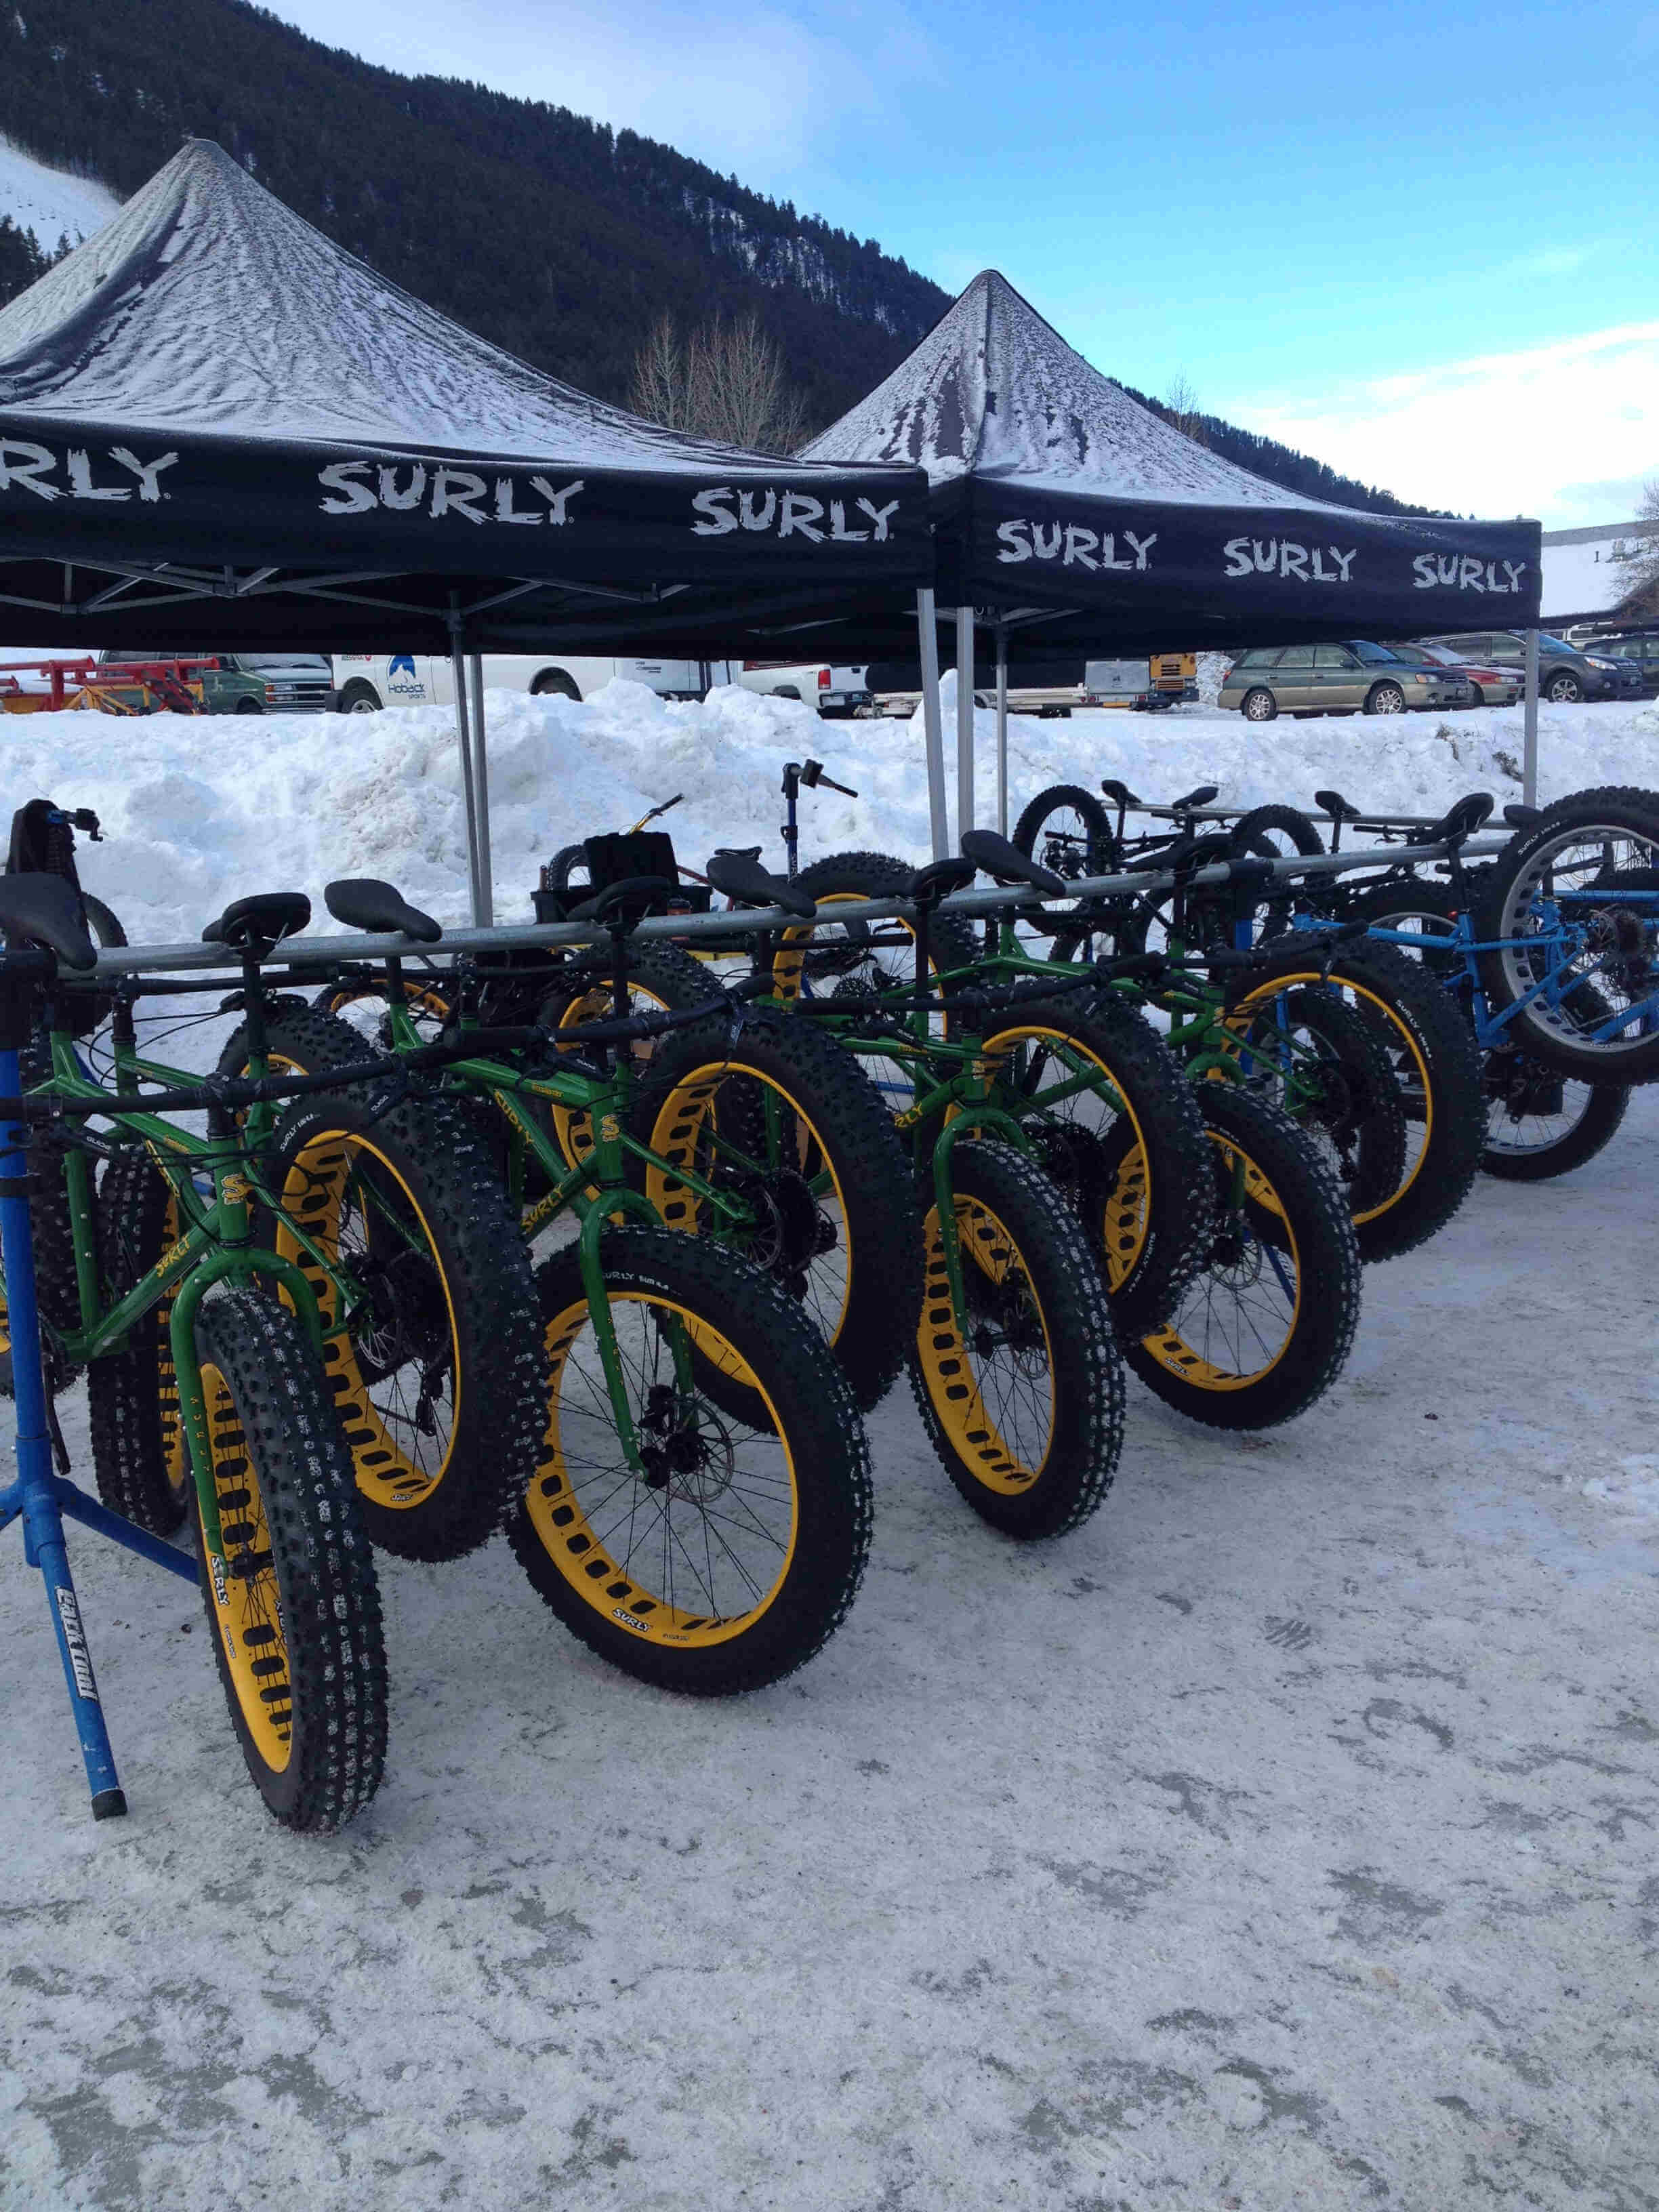 A row of green and yellow Surly fat bikes lined up under canopies in the snow, with a mountain in the background